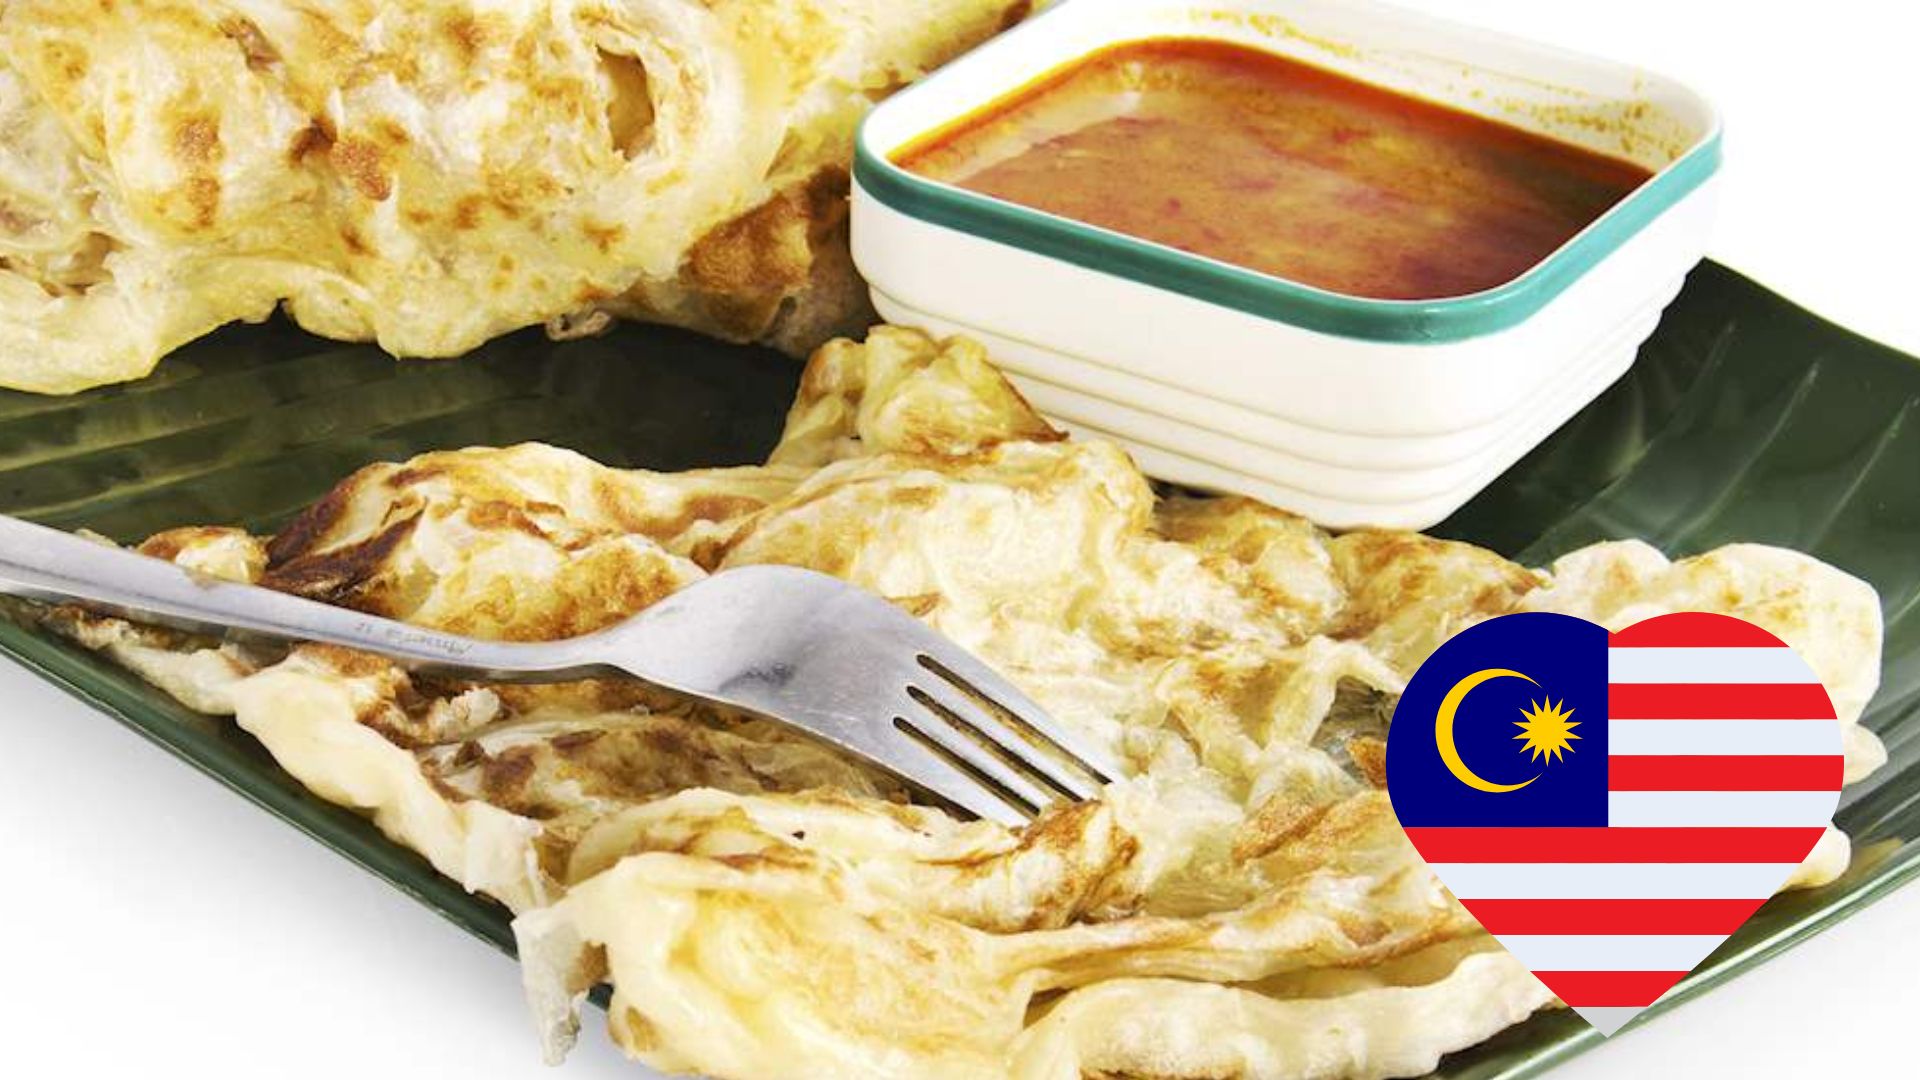 Yes we are No. 1! But would you consider Roti Canai as a street food?